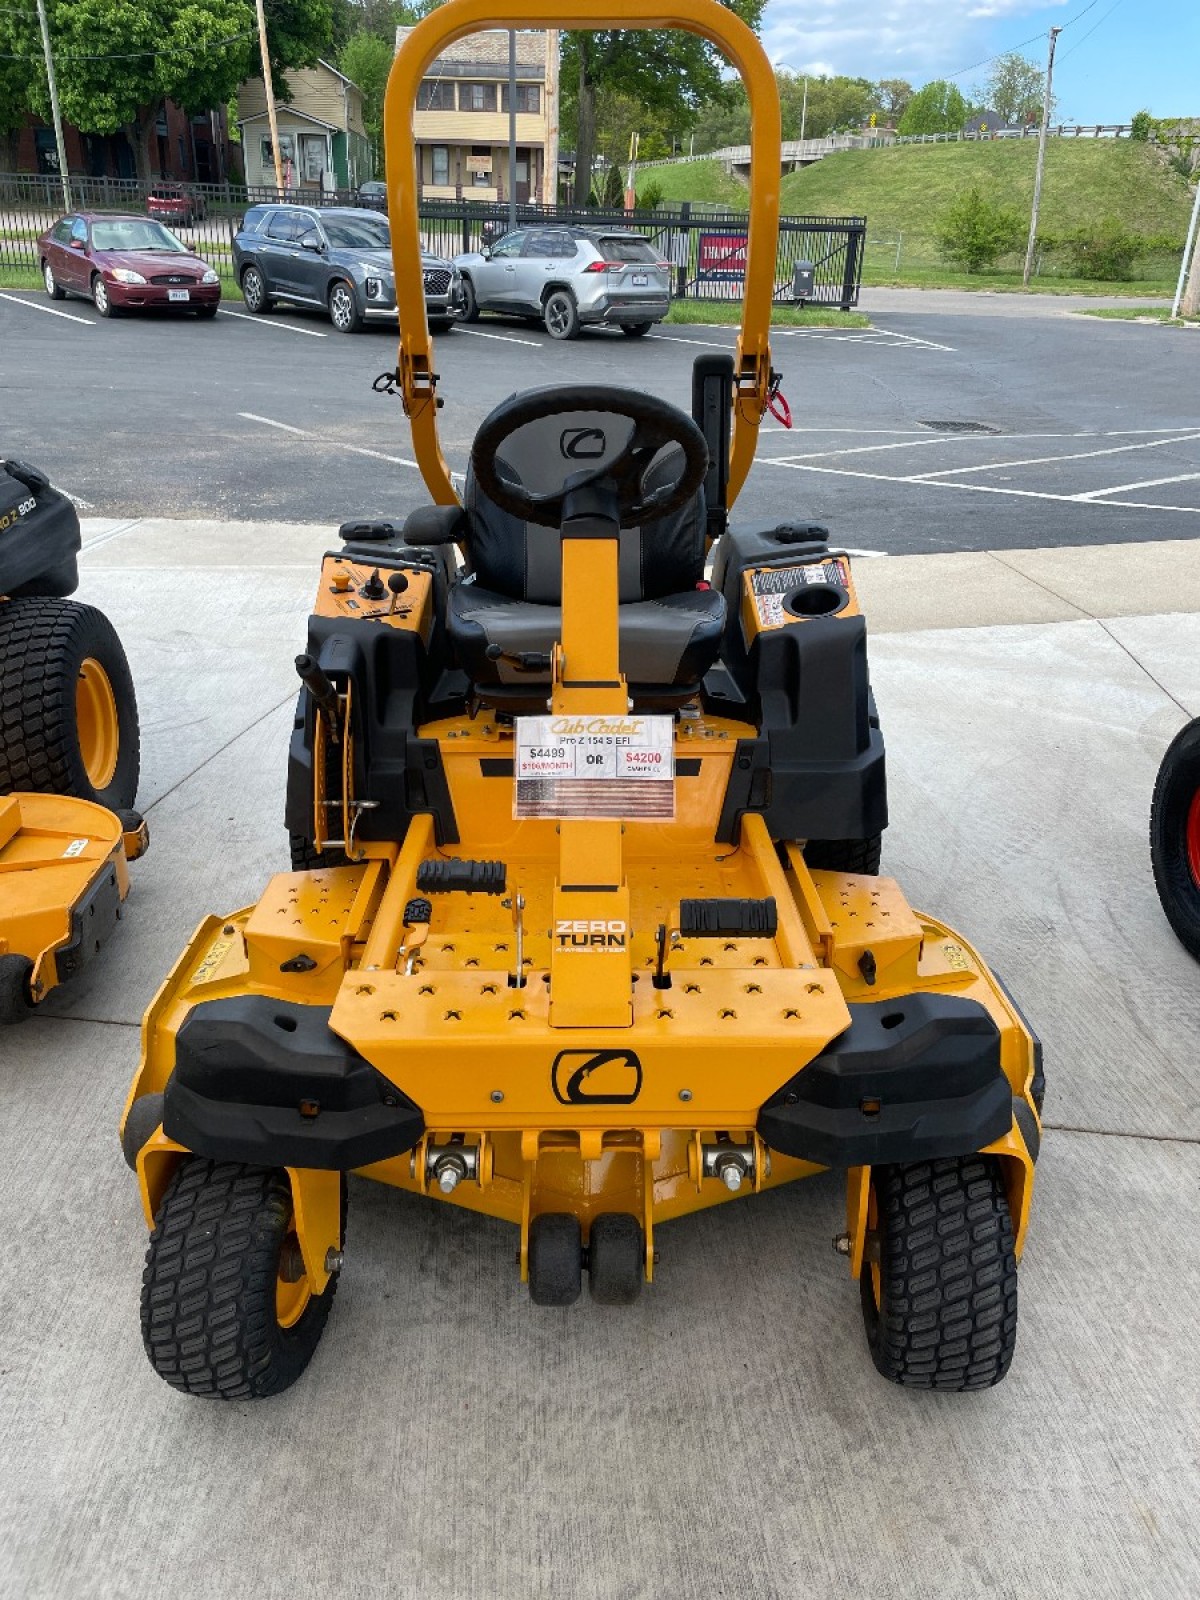 American Pride Power Equipment - Used Pre-Owned Cub Cadet Pro Z 154 S EFI